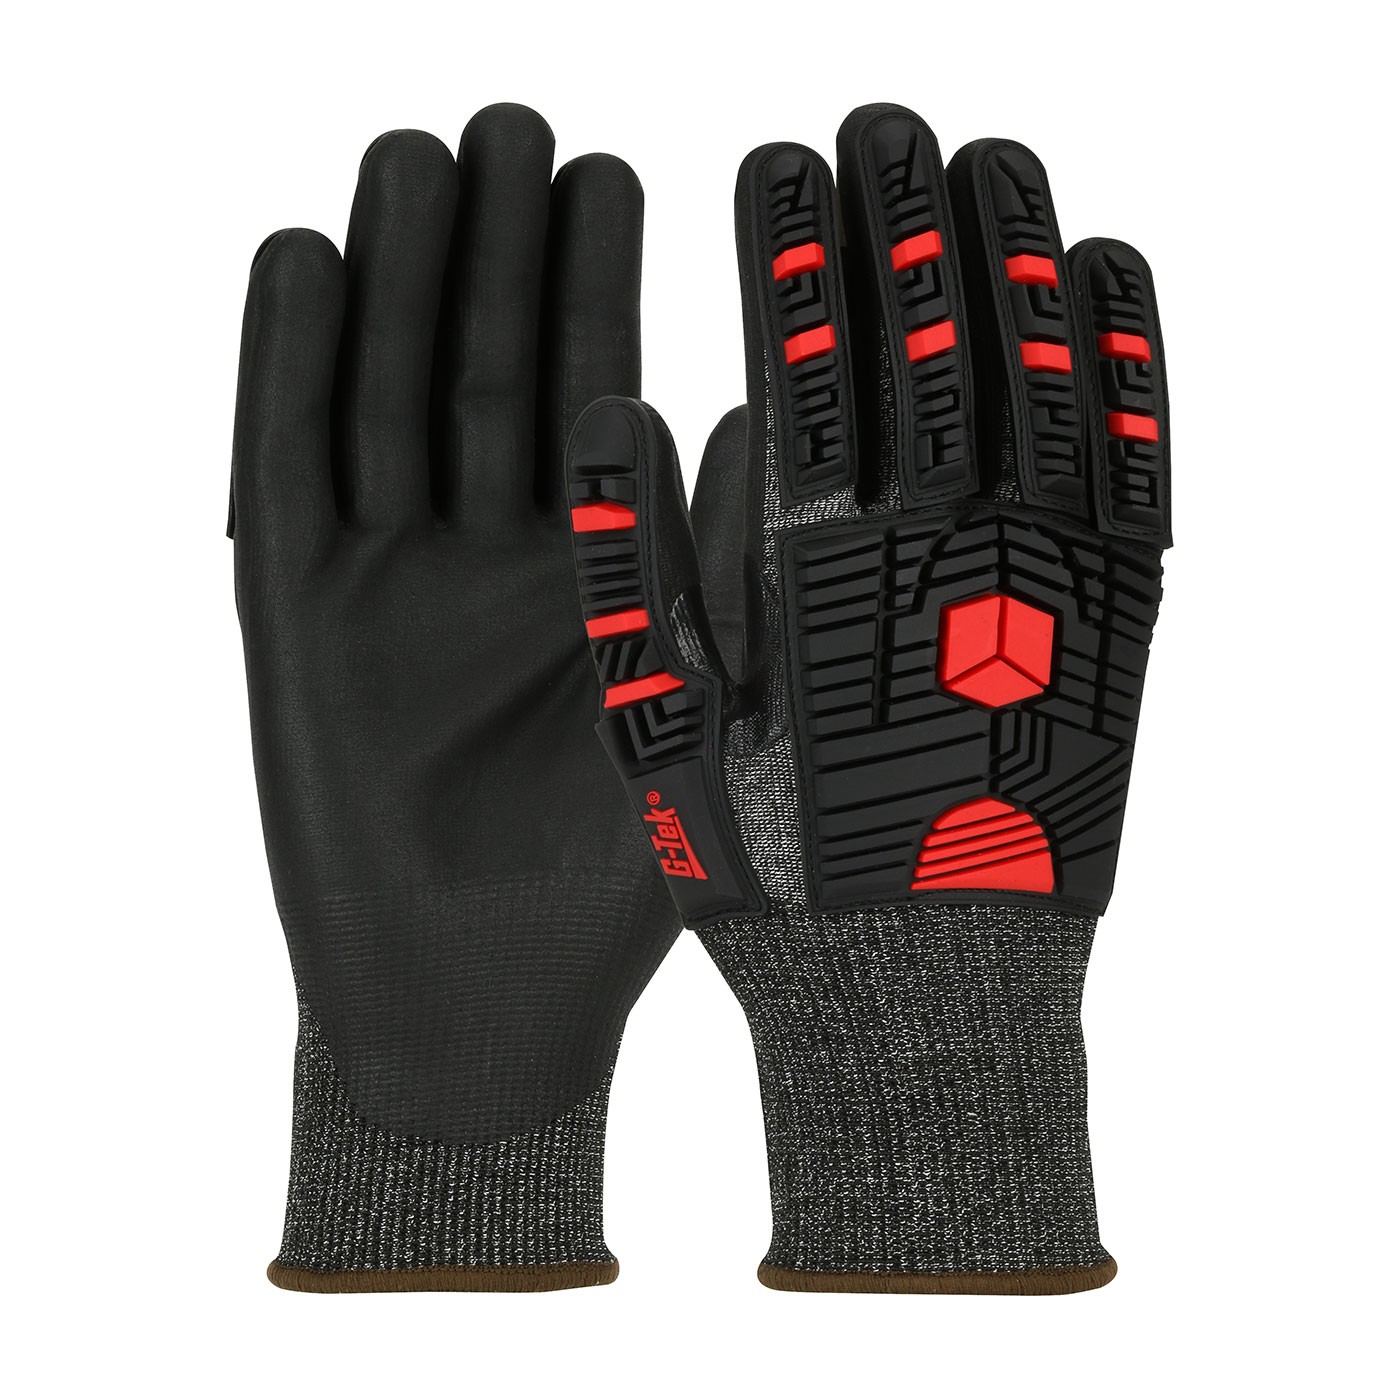 G-Tek® PolyKor® X7™ Seamless Knit PolyKor® X7™ Blended Glove with Impact Protection and NeoFoam® Coated Palm & Fingers  (#16-MP785)